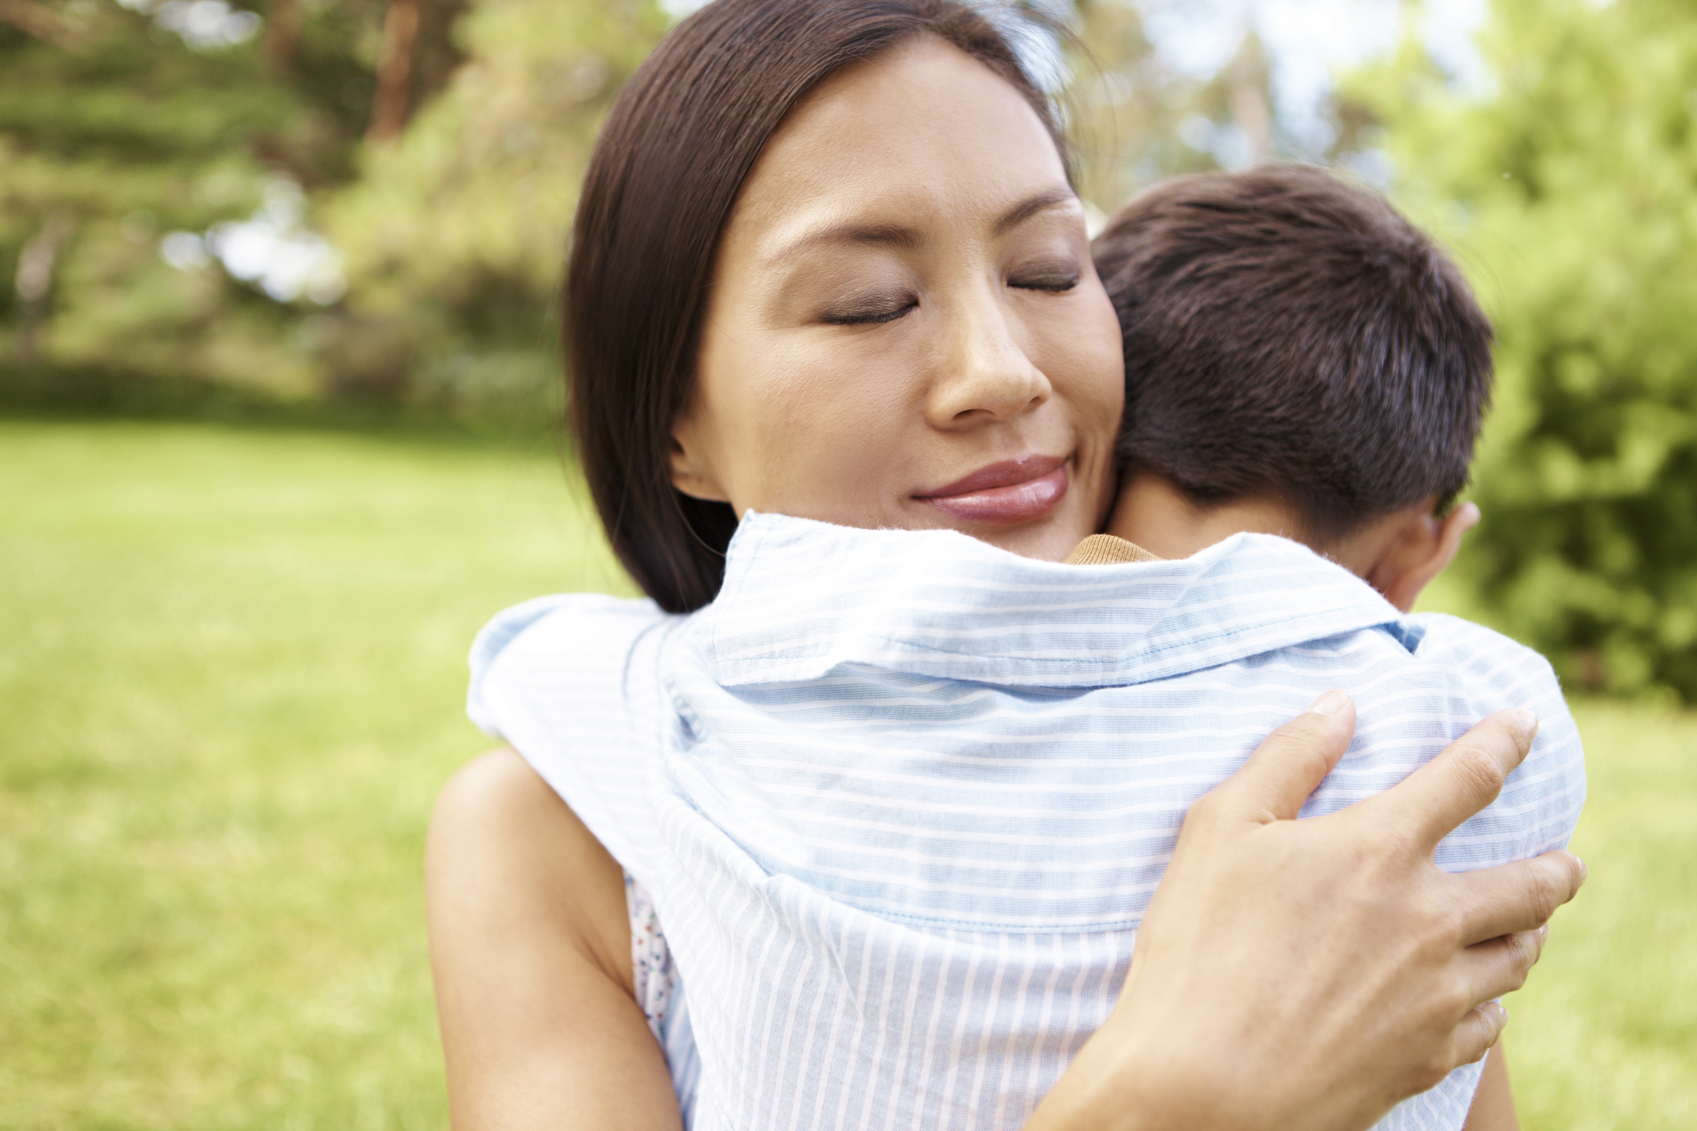 Things a Mom Should Share with Her Son